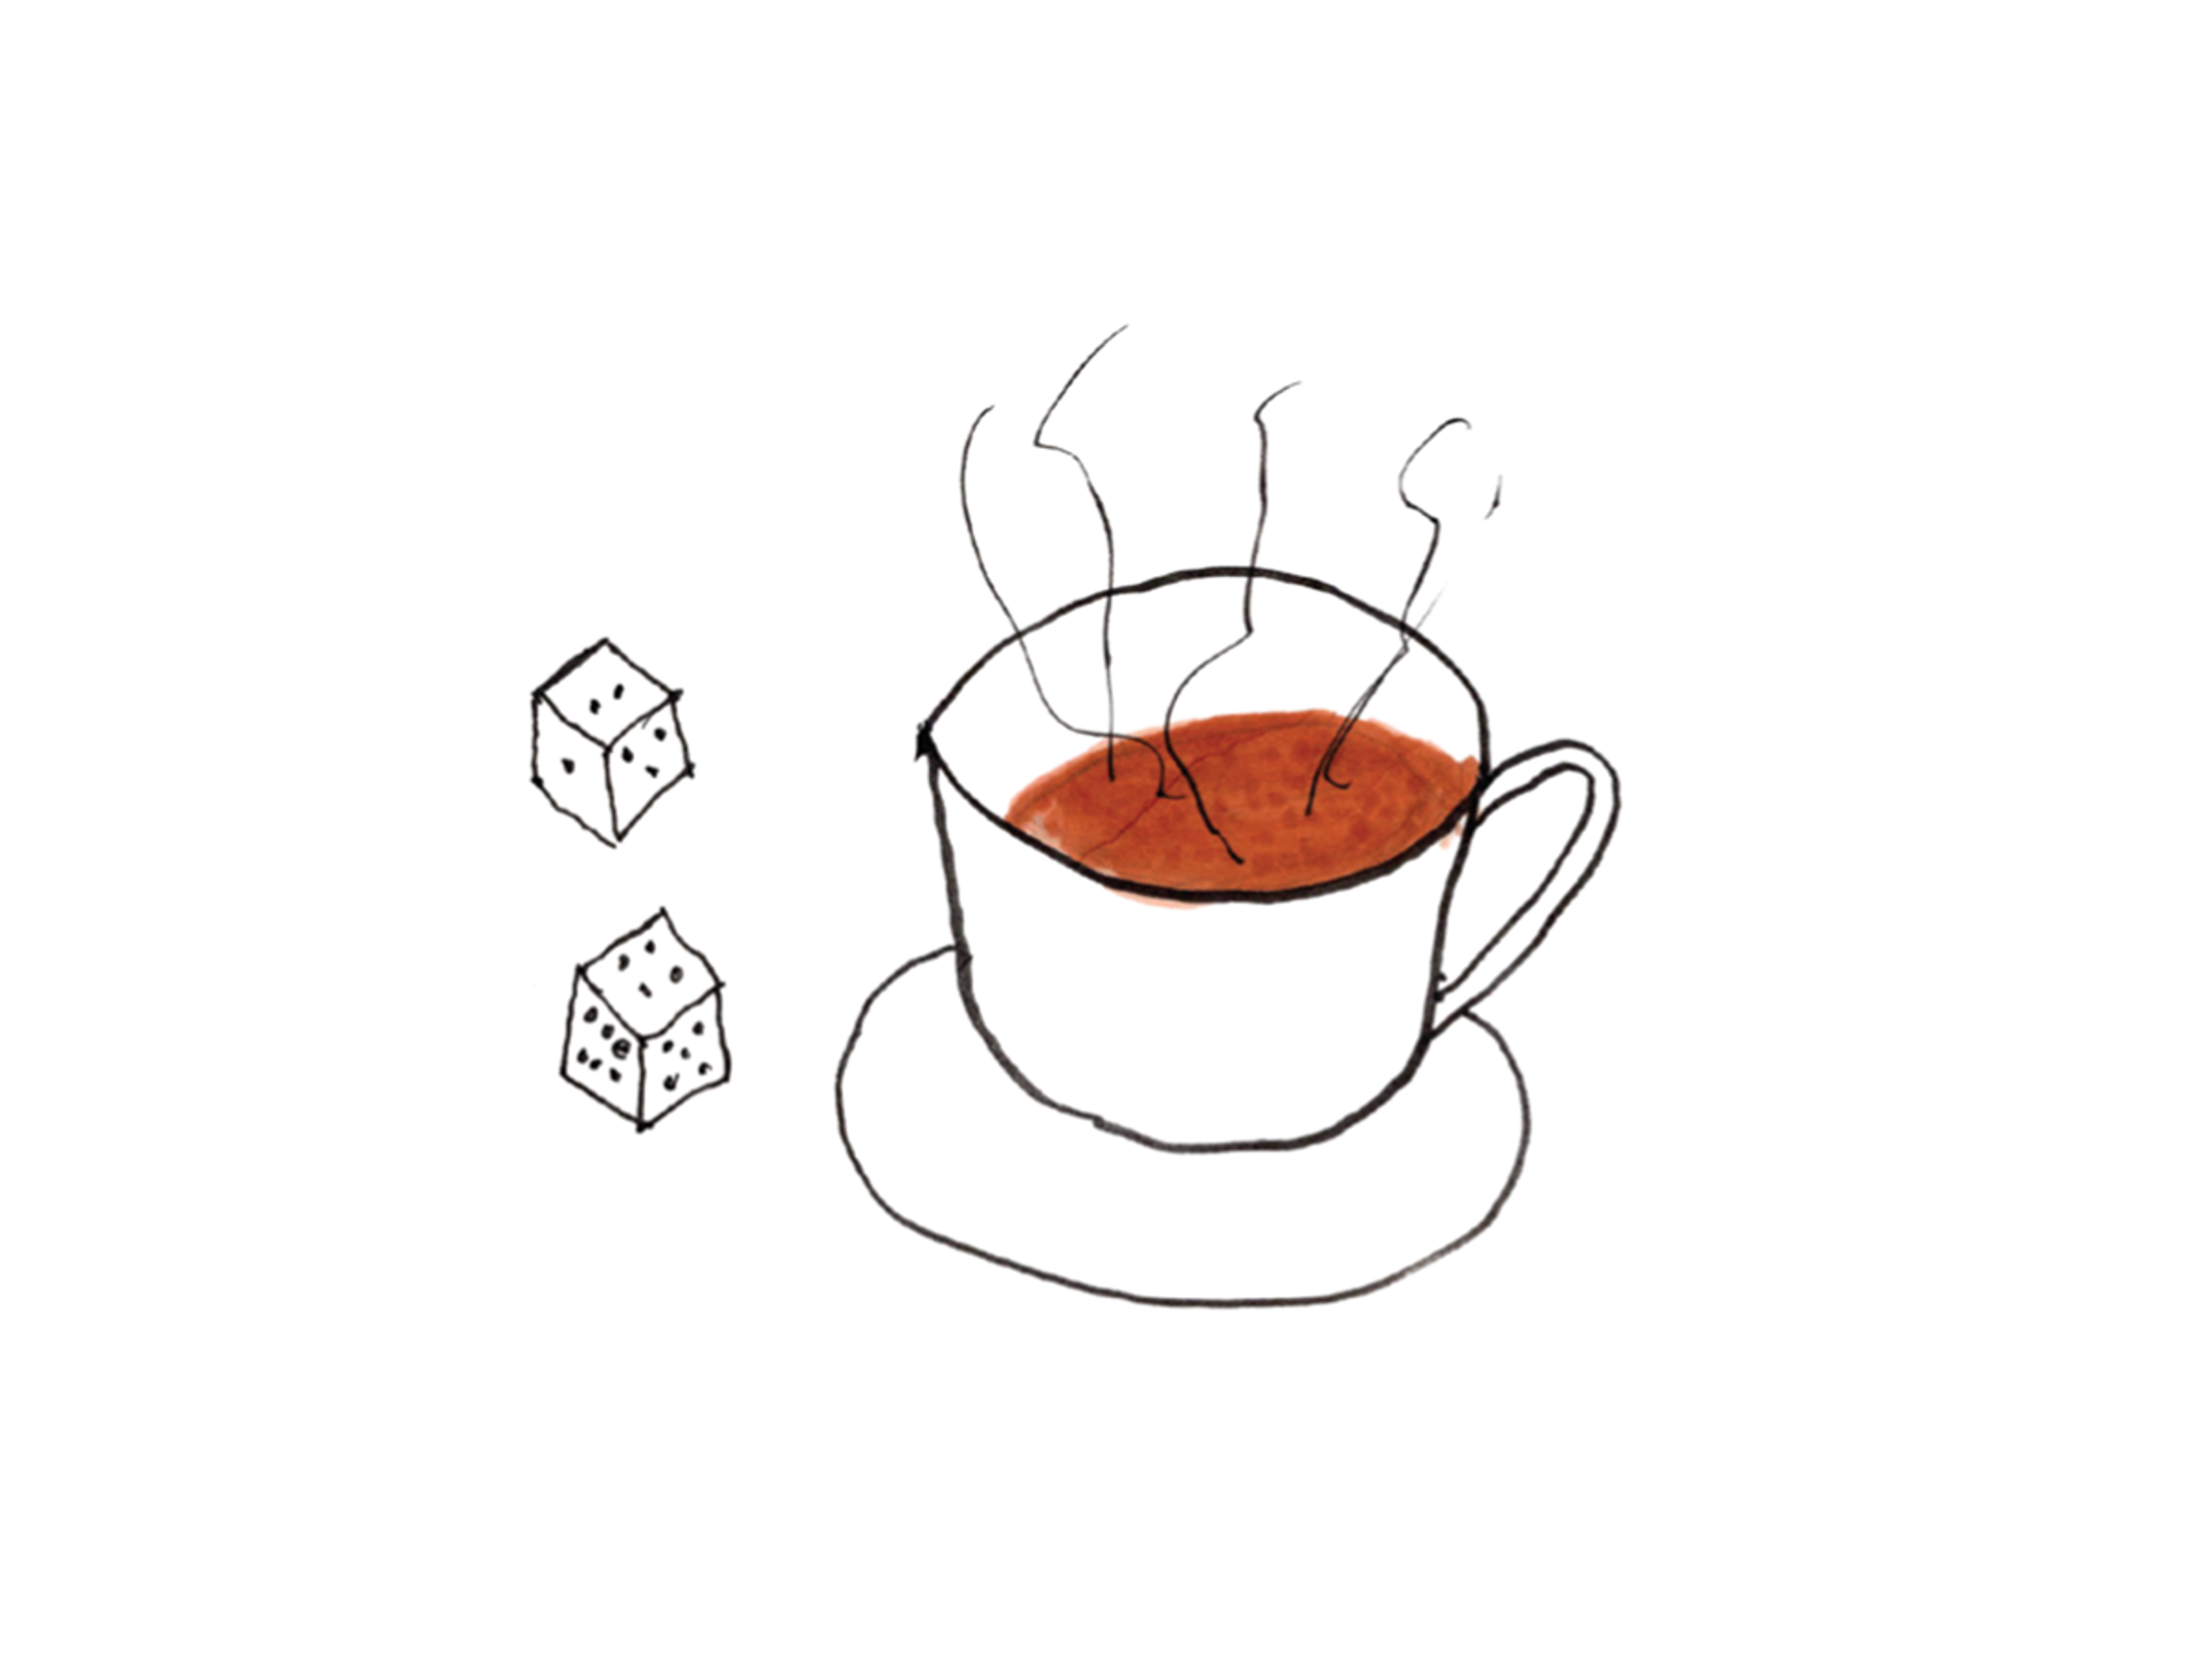 Drawing of a cup and saucer with tea with steam lines coming off it, and two dice